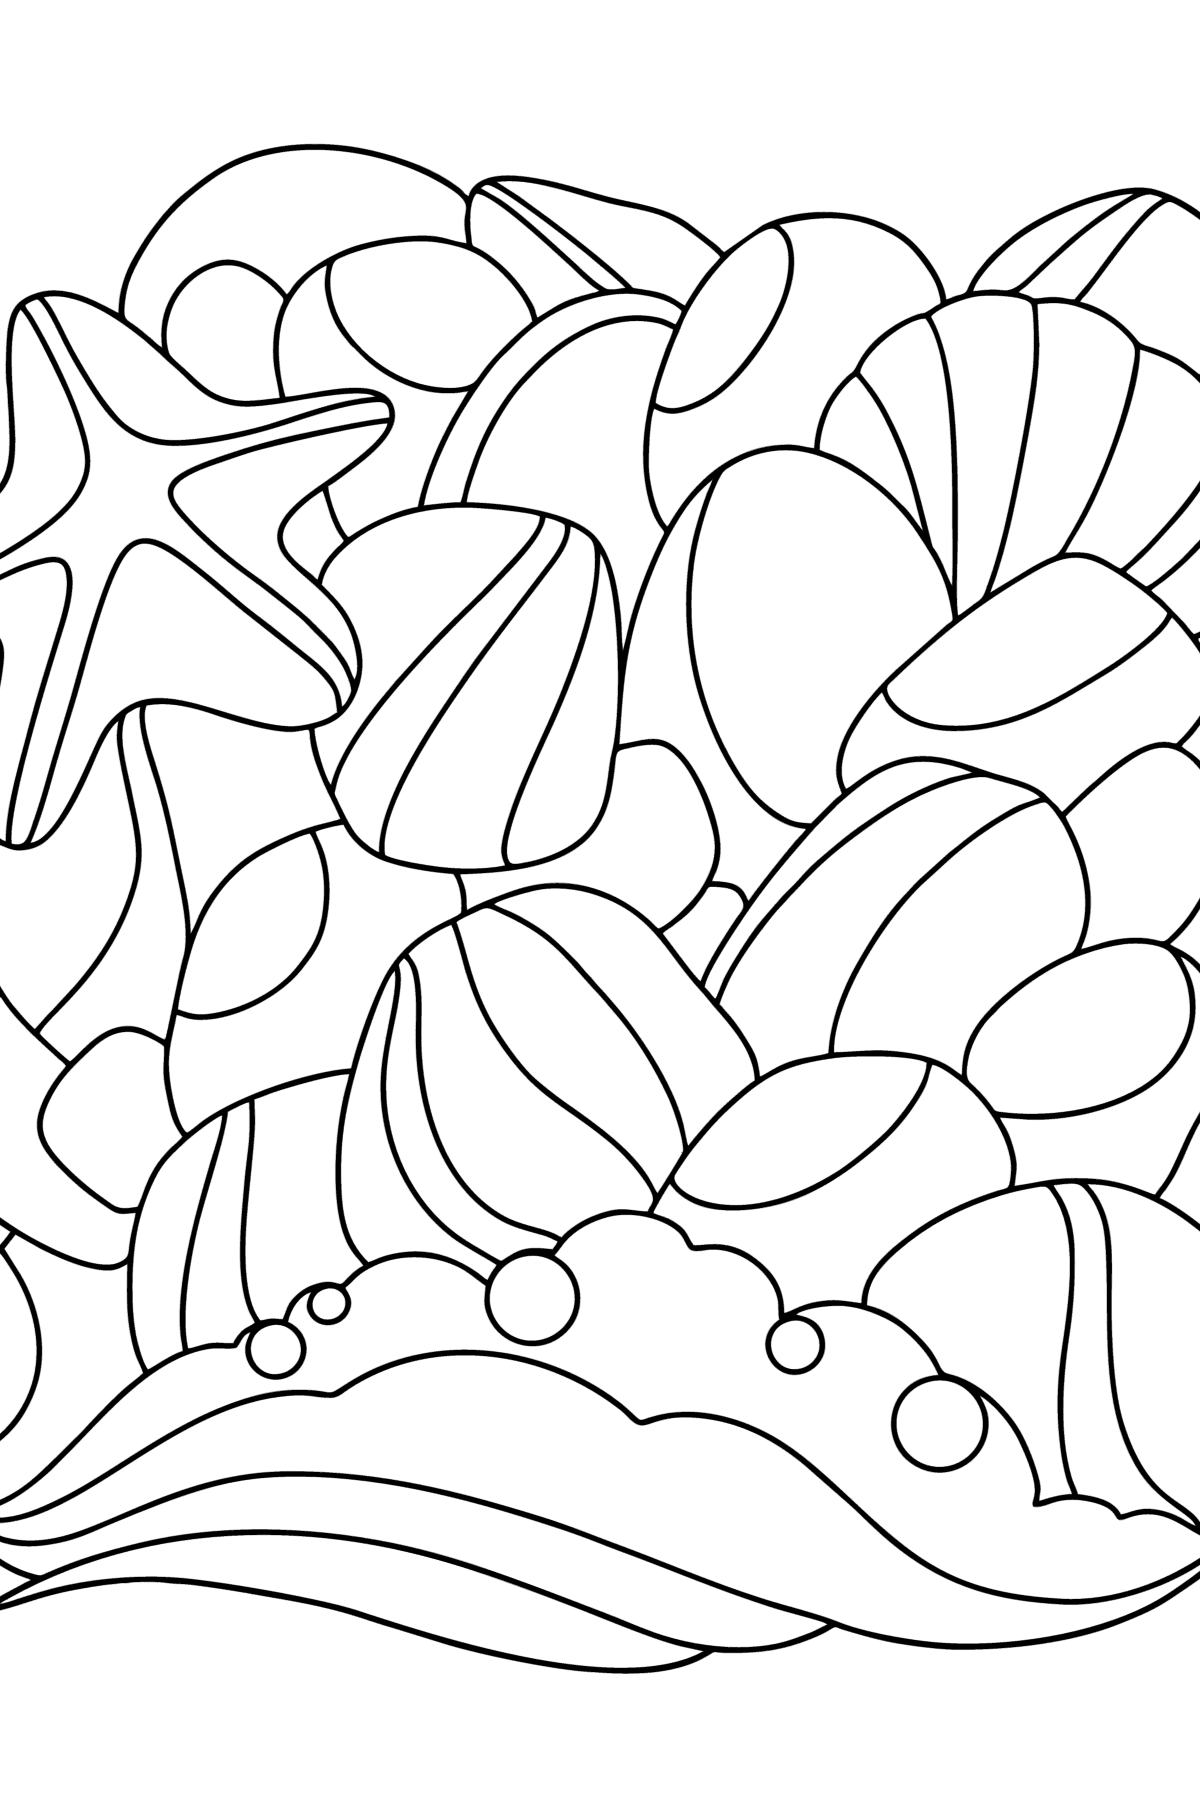 Doodle Coloring Page for Kids - Sea Pebbles - Coloring Pages for Kids